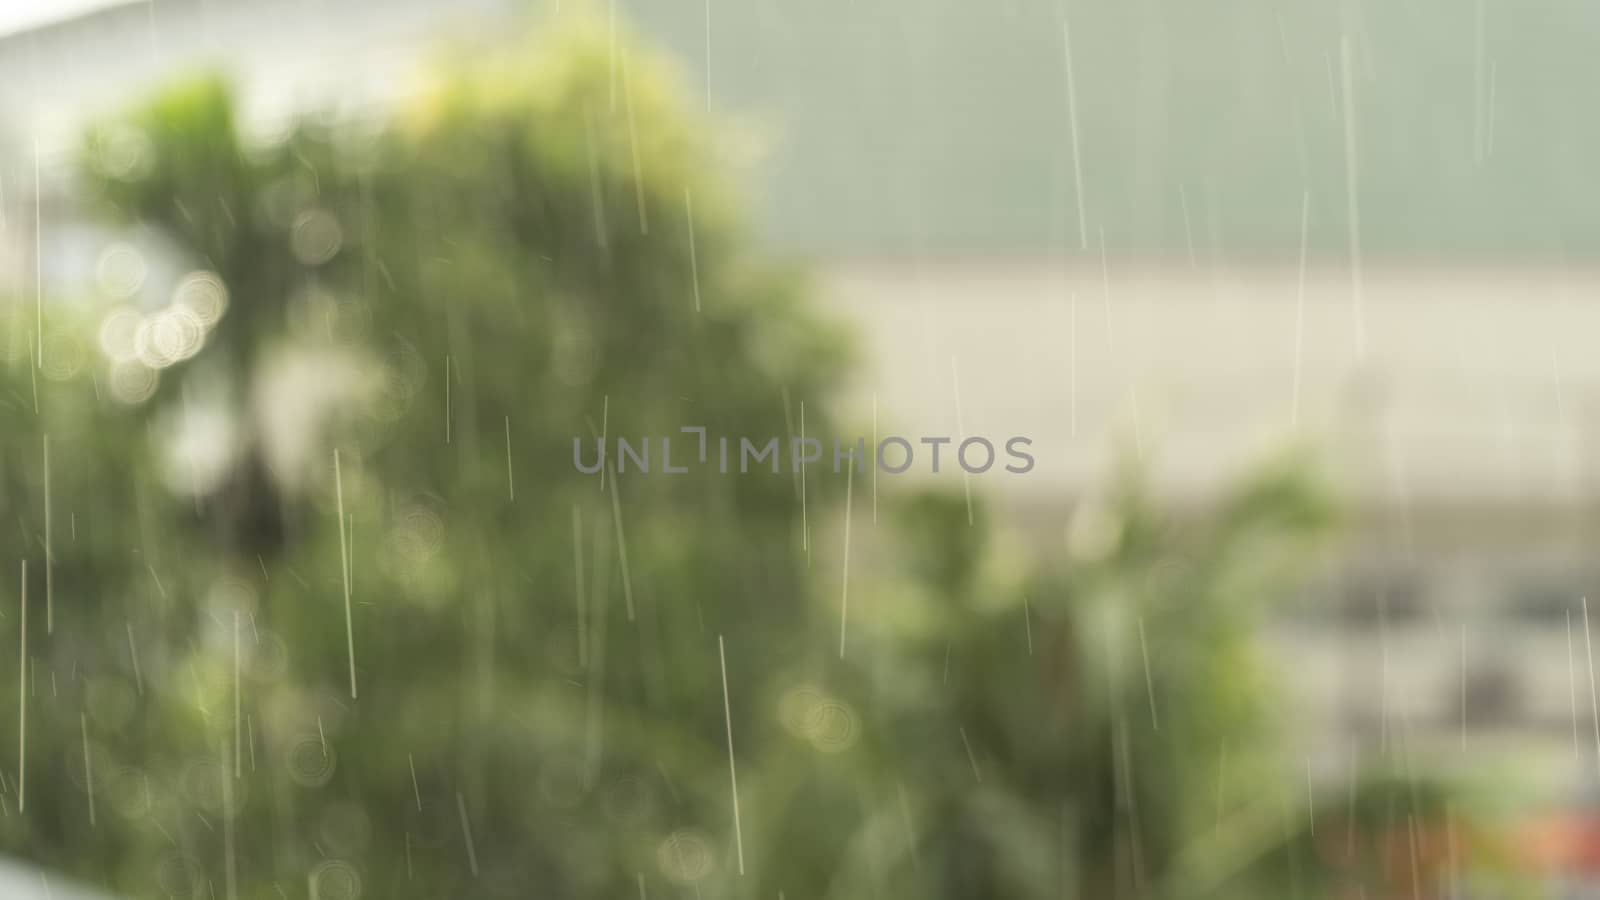 Blurred photo of a light rain or drizzle with trees in the background